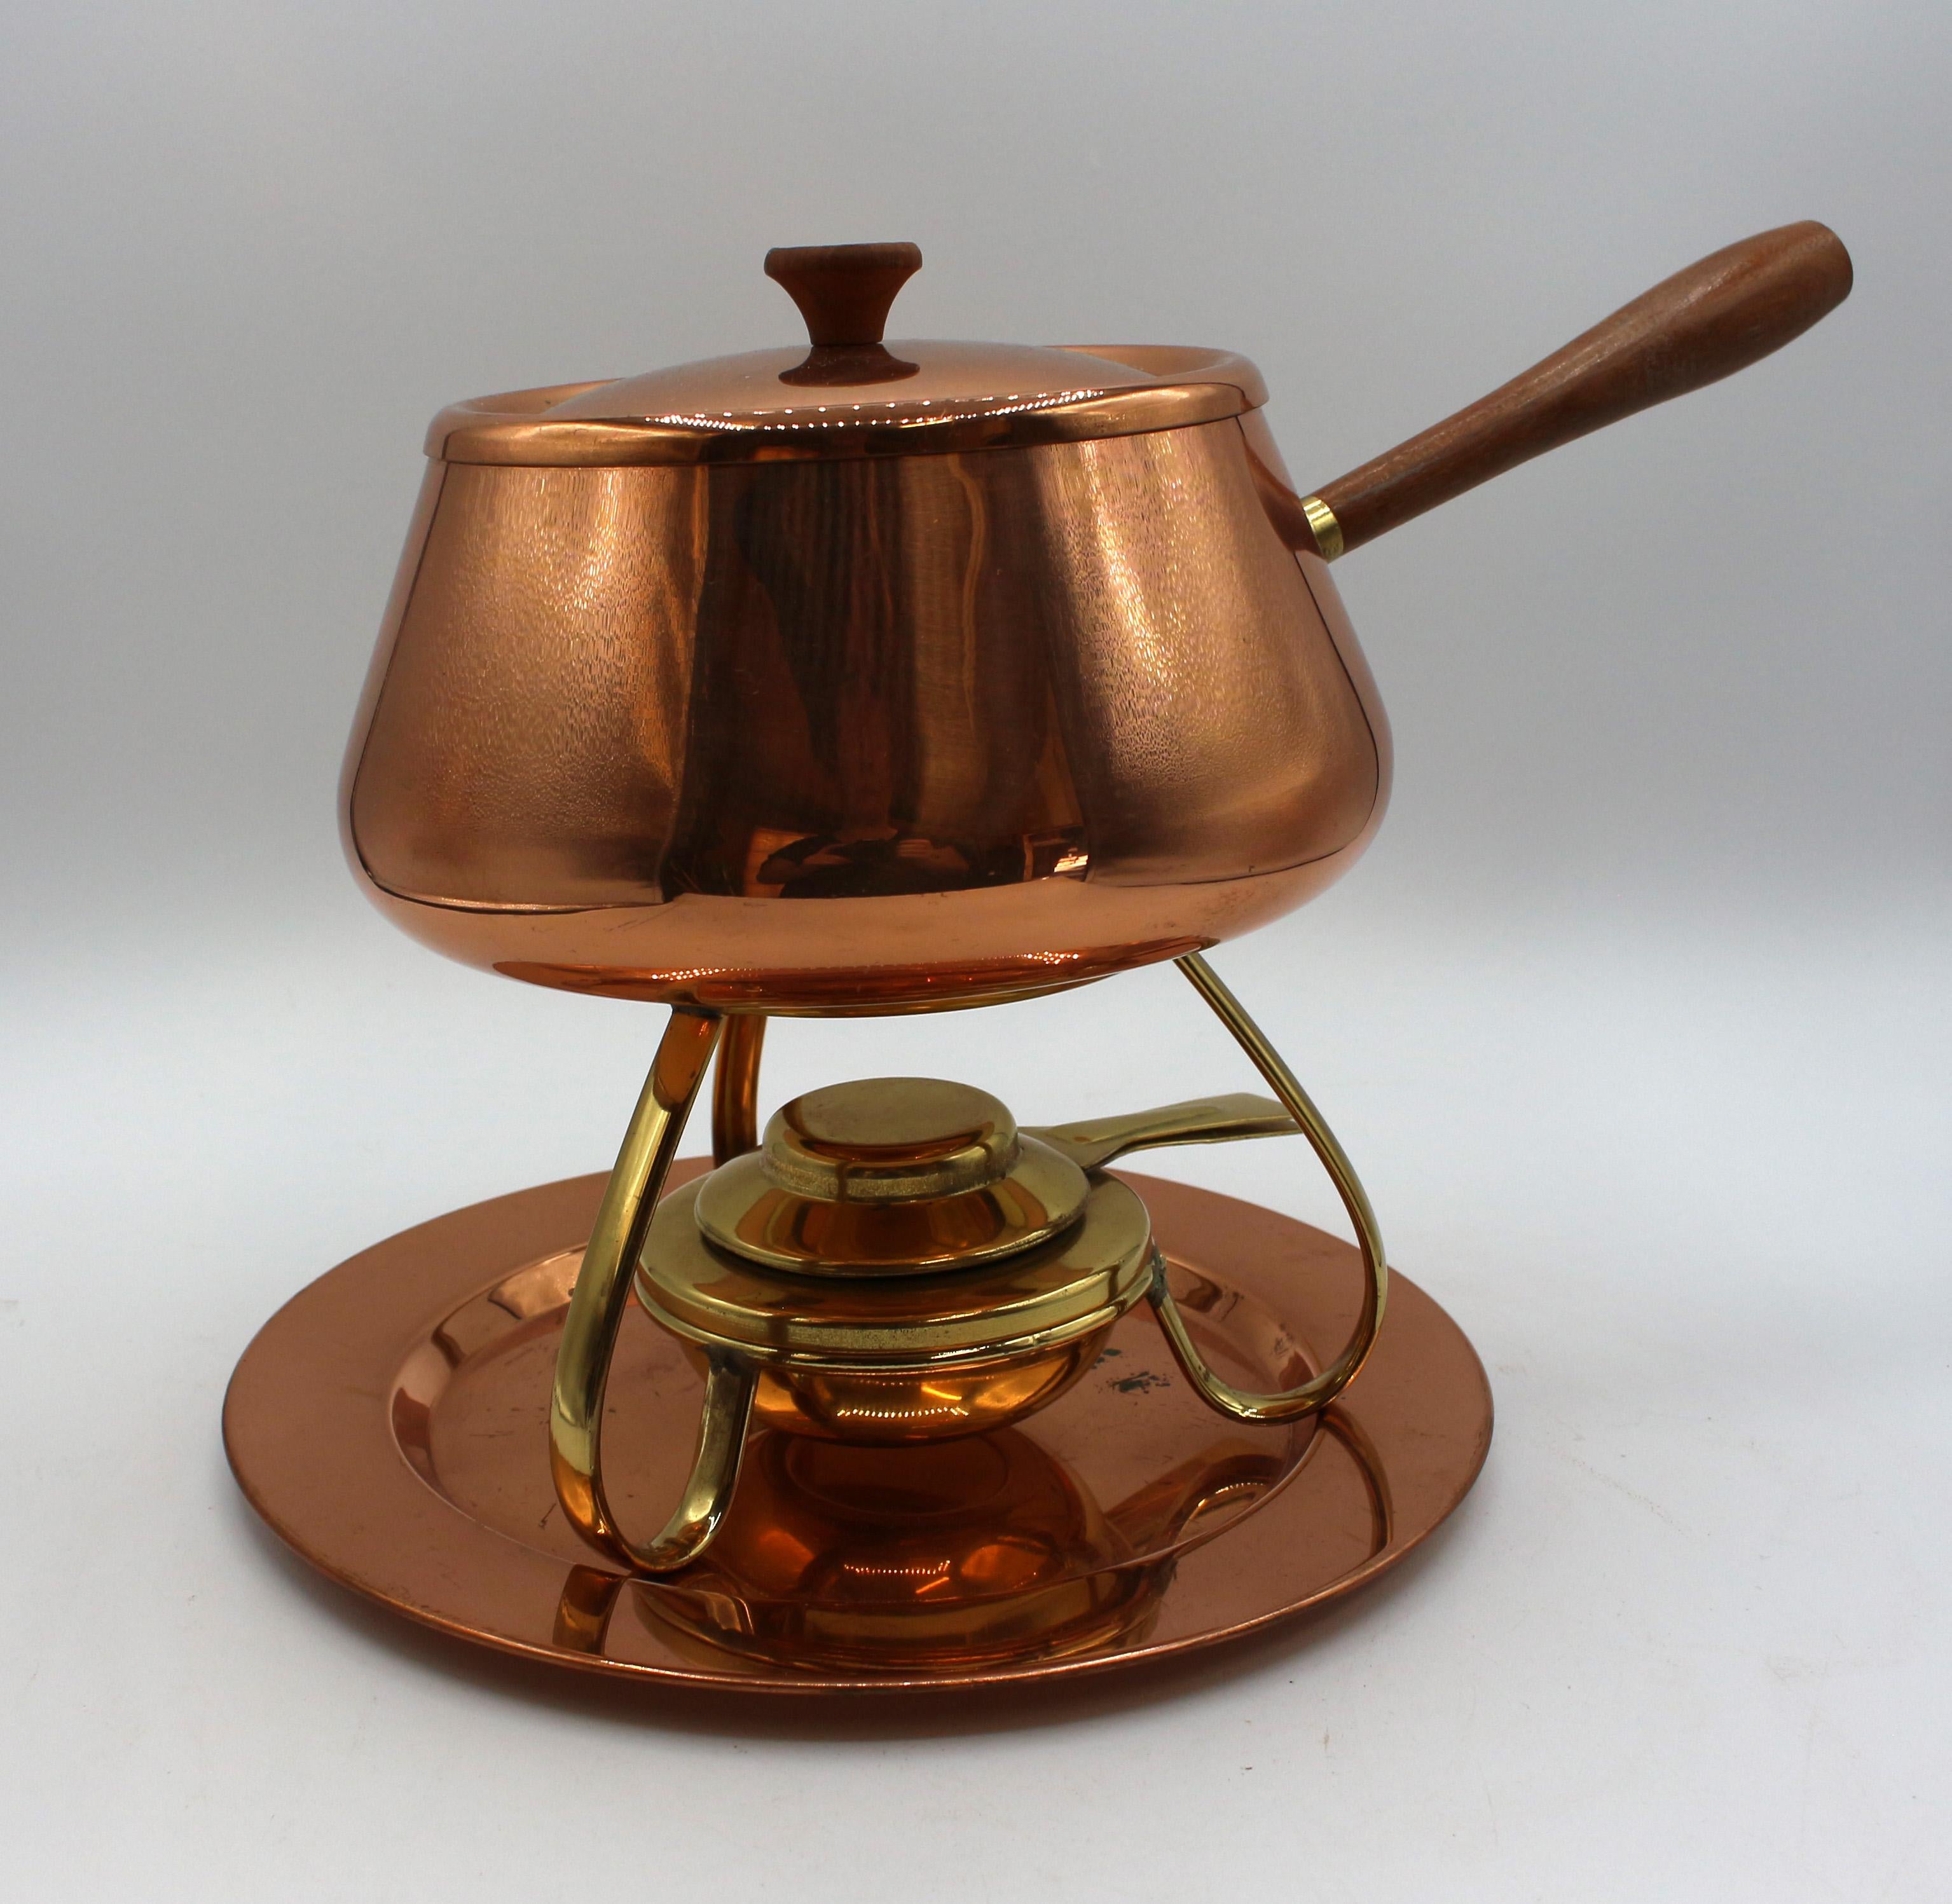 Circa 1960s copper fondue pot & stand by Magellan made in Portugal. Solid copper, tin lined with teak handle & finial. Stand of solid brass sits on the copper tray. With original care instructions. Stamped 